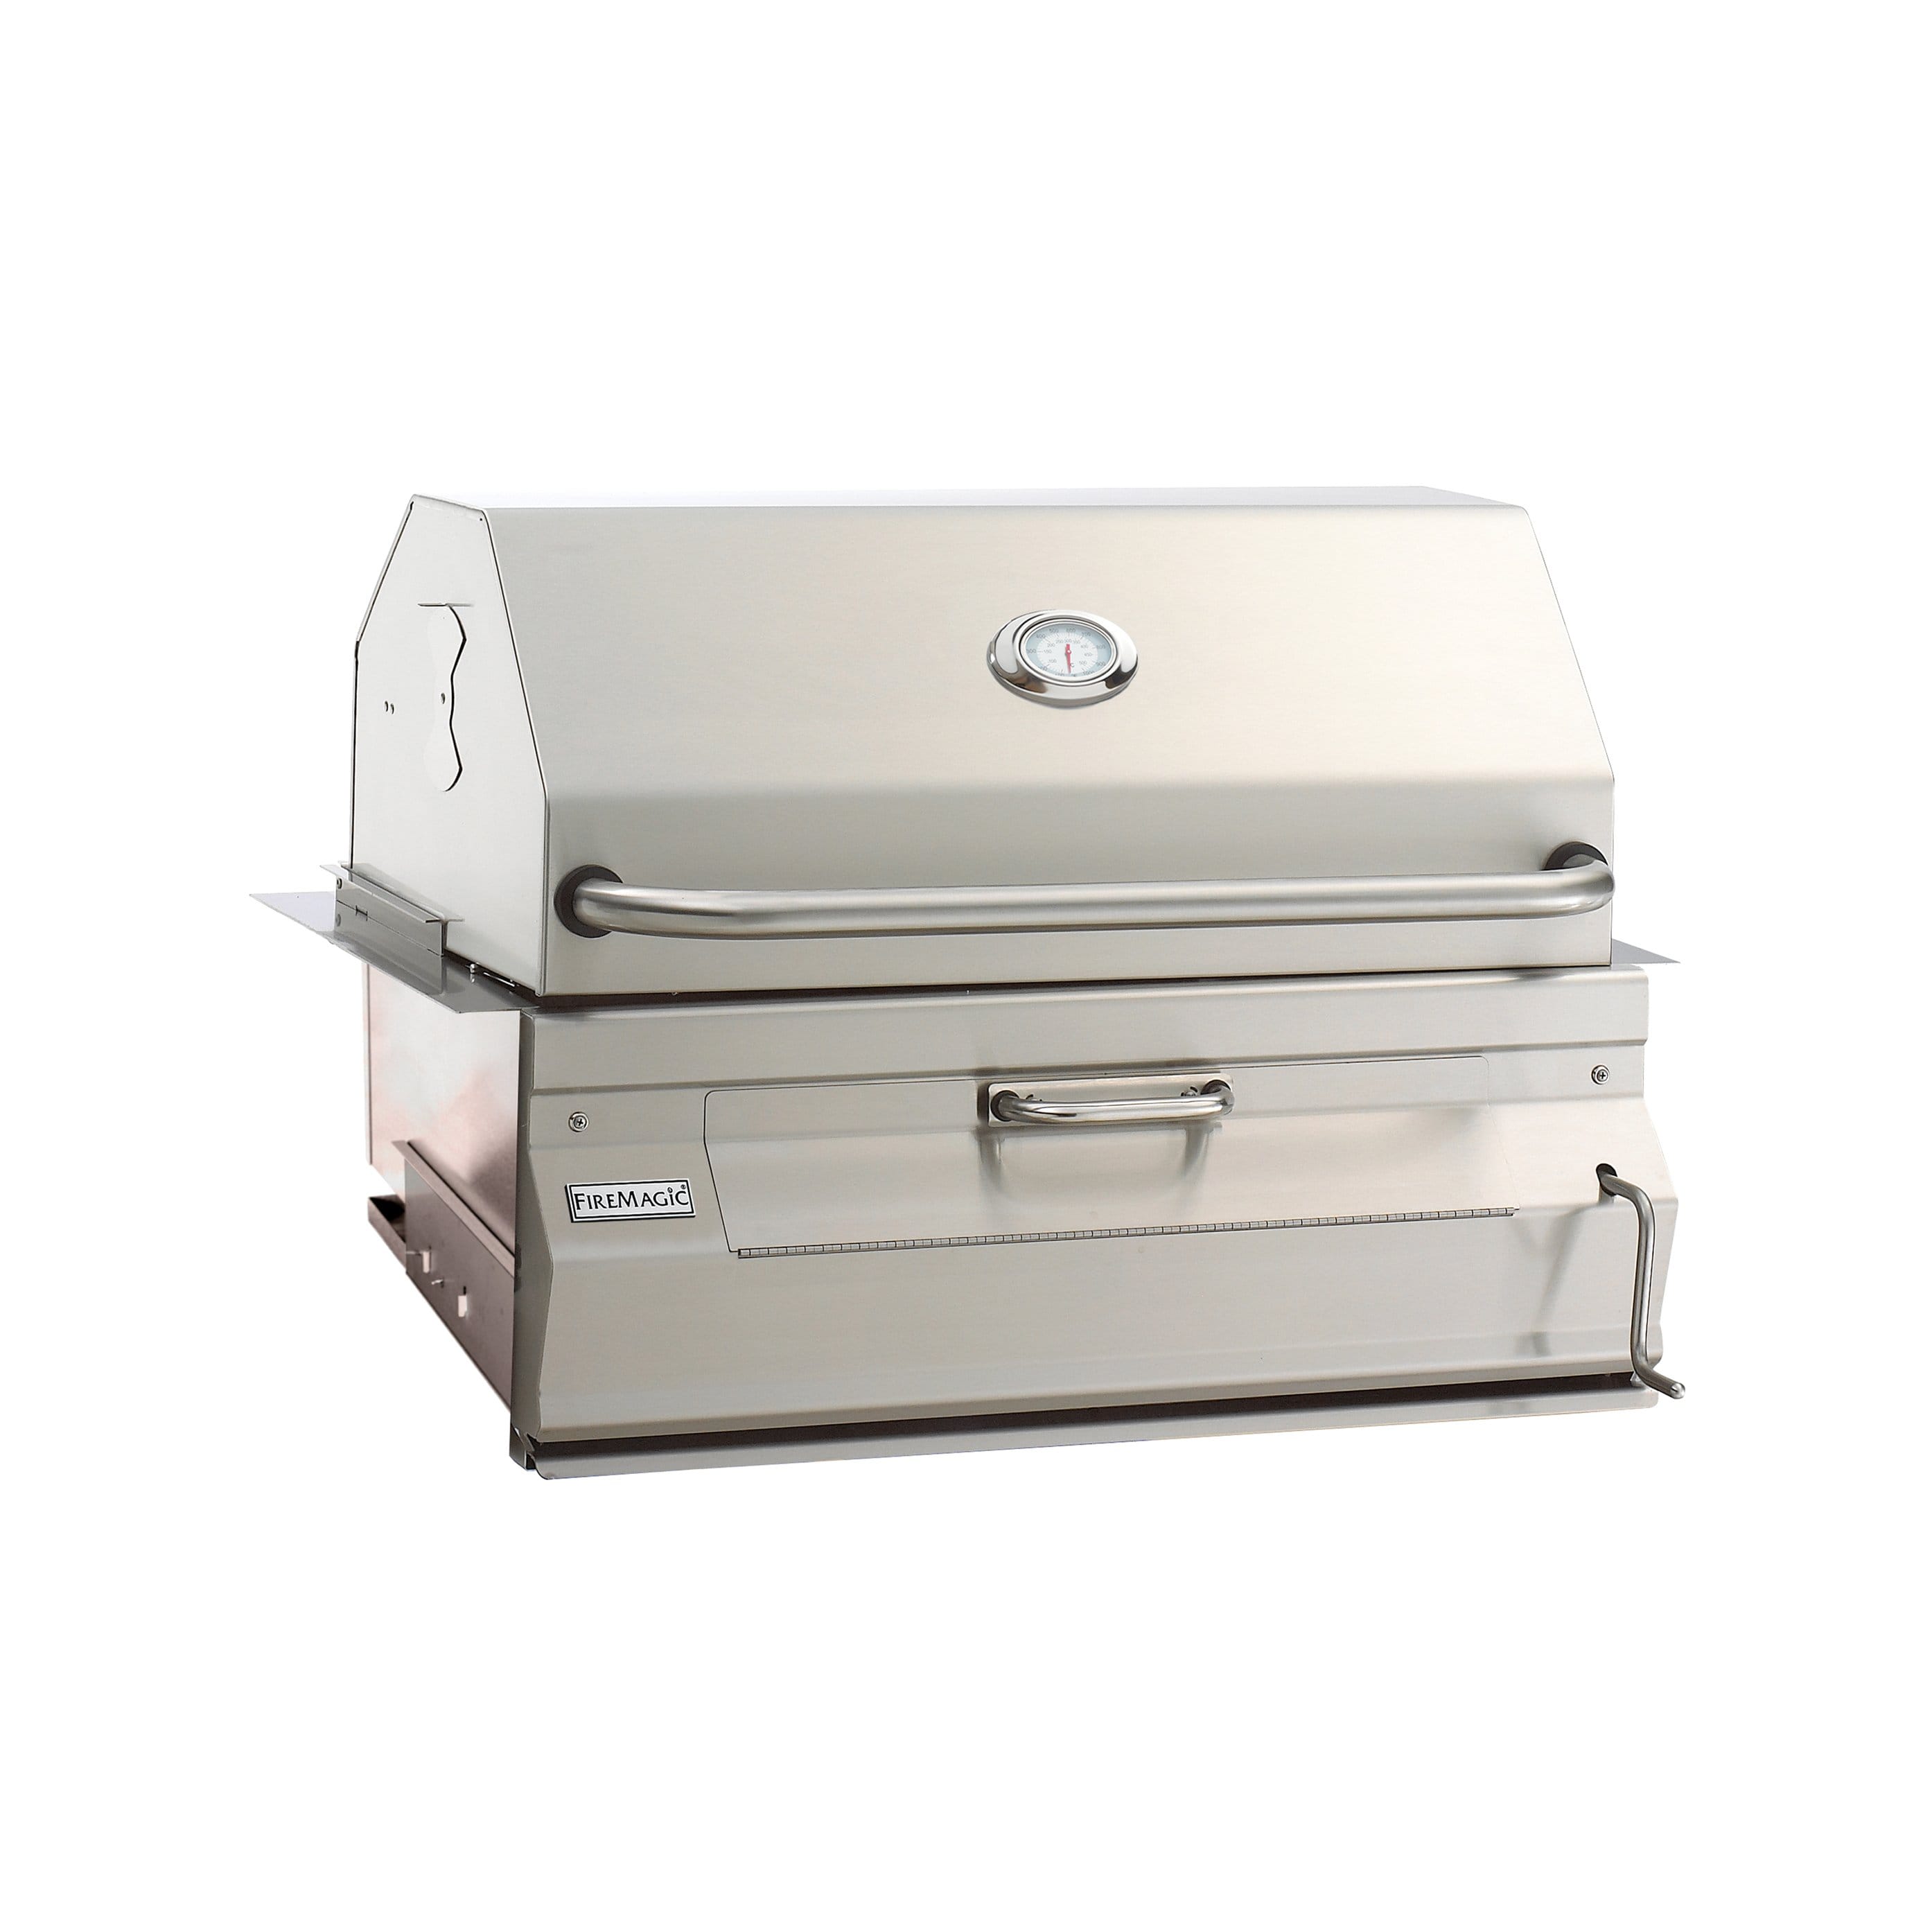 Fire Magic 24" Legacy Series Built-In Charcoal Grill in Stainless Steel Finish (12-SC01C-A)